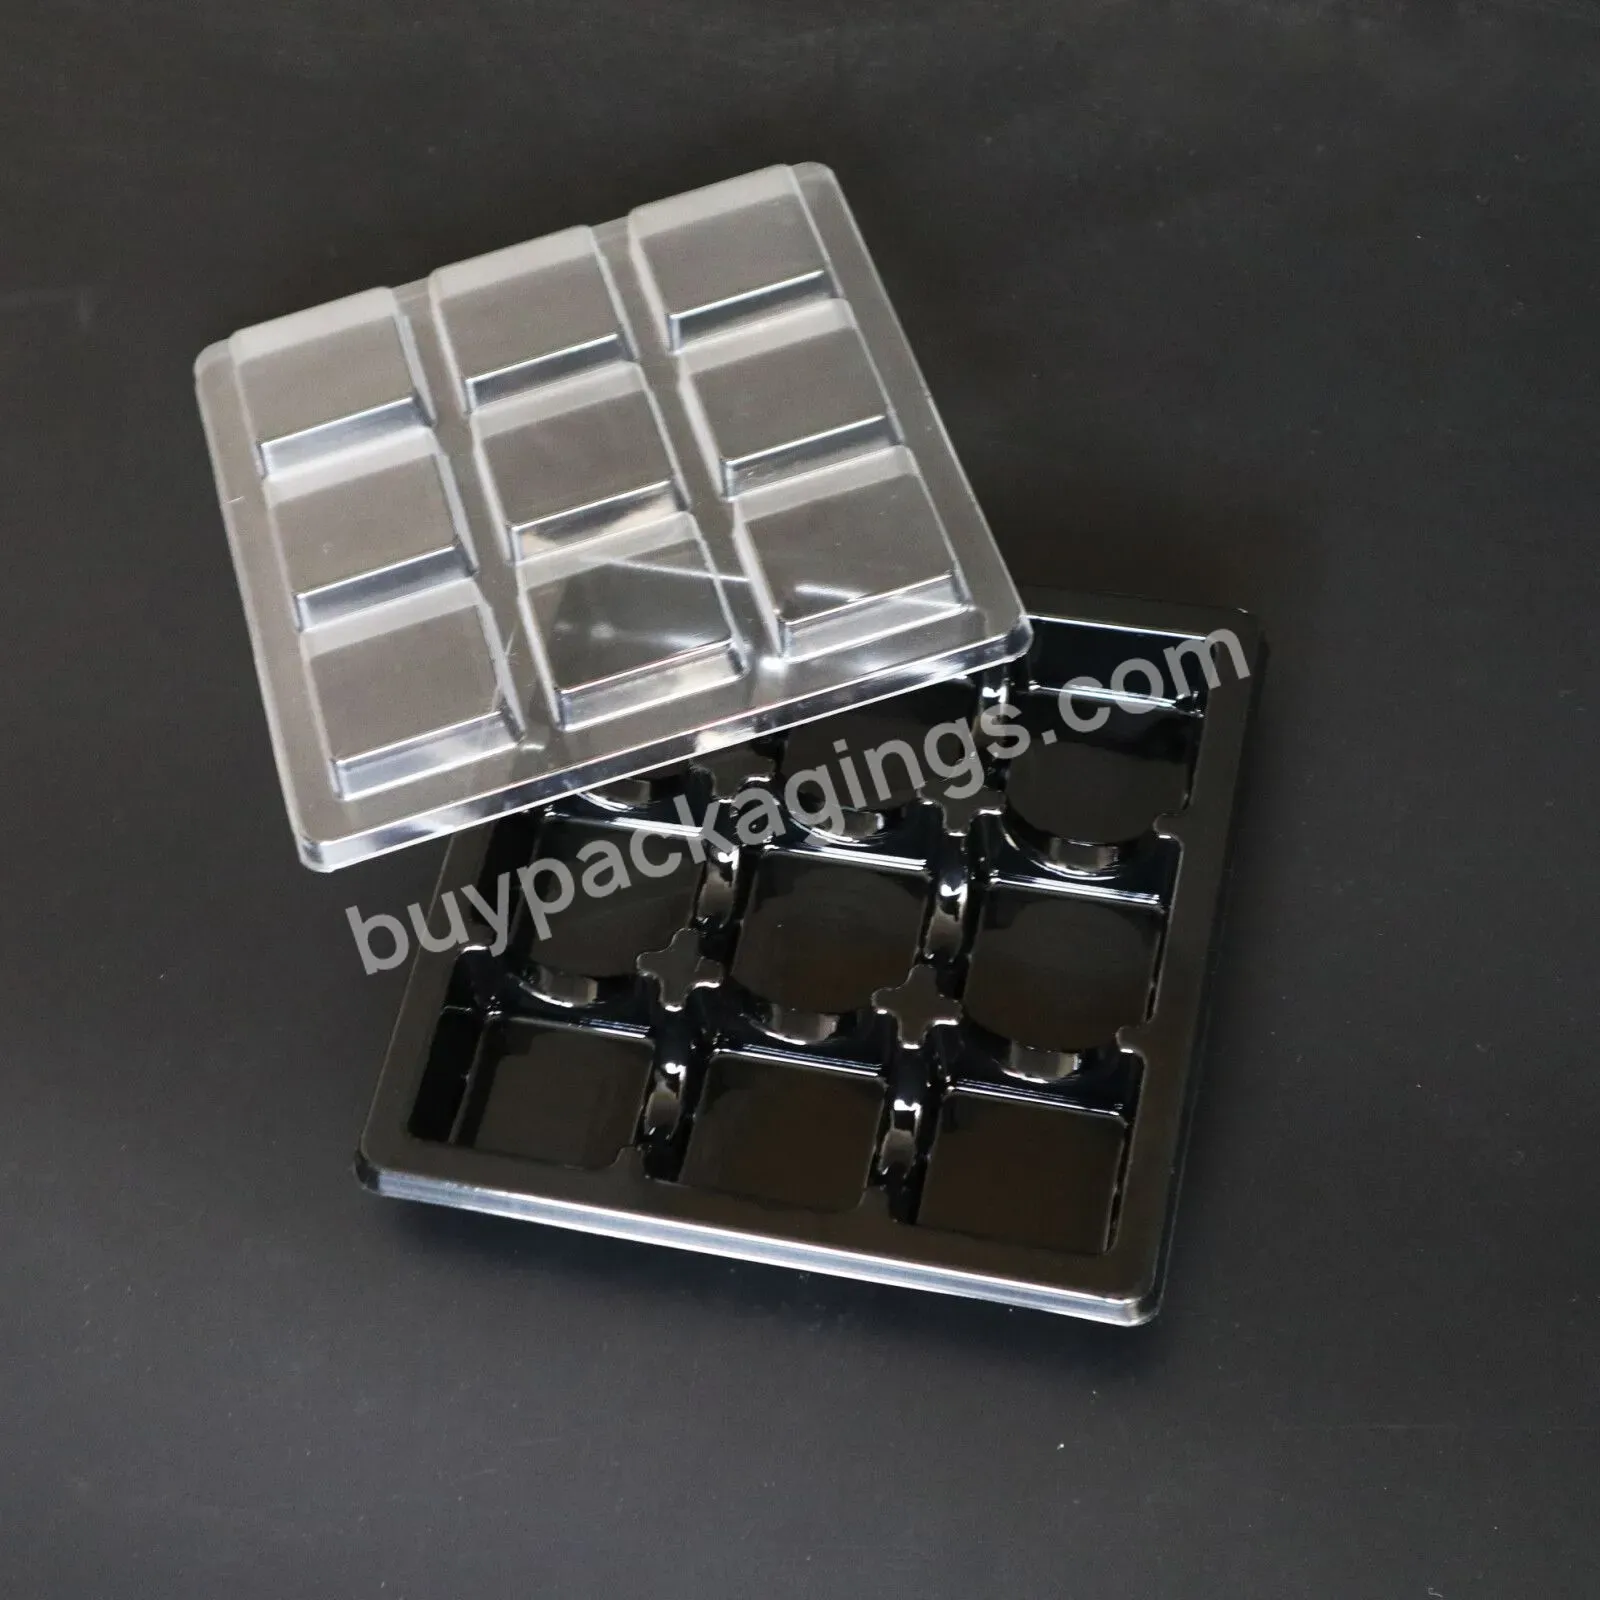 Food Grade Chocolate Candy Packaging With Tray Insert Plastic Tray Chocolate Truffles Box With Tray Insert - Buy Food Grade Plastic Tray Chocolate Truffles Box With,Chocolate Box Blister Inner Tray,Chocolate Candy Packaging With Tray Insert.